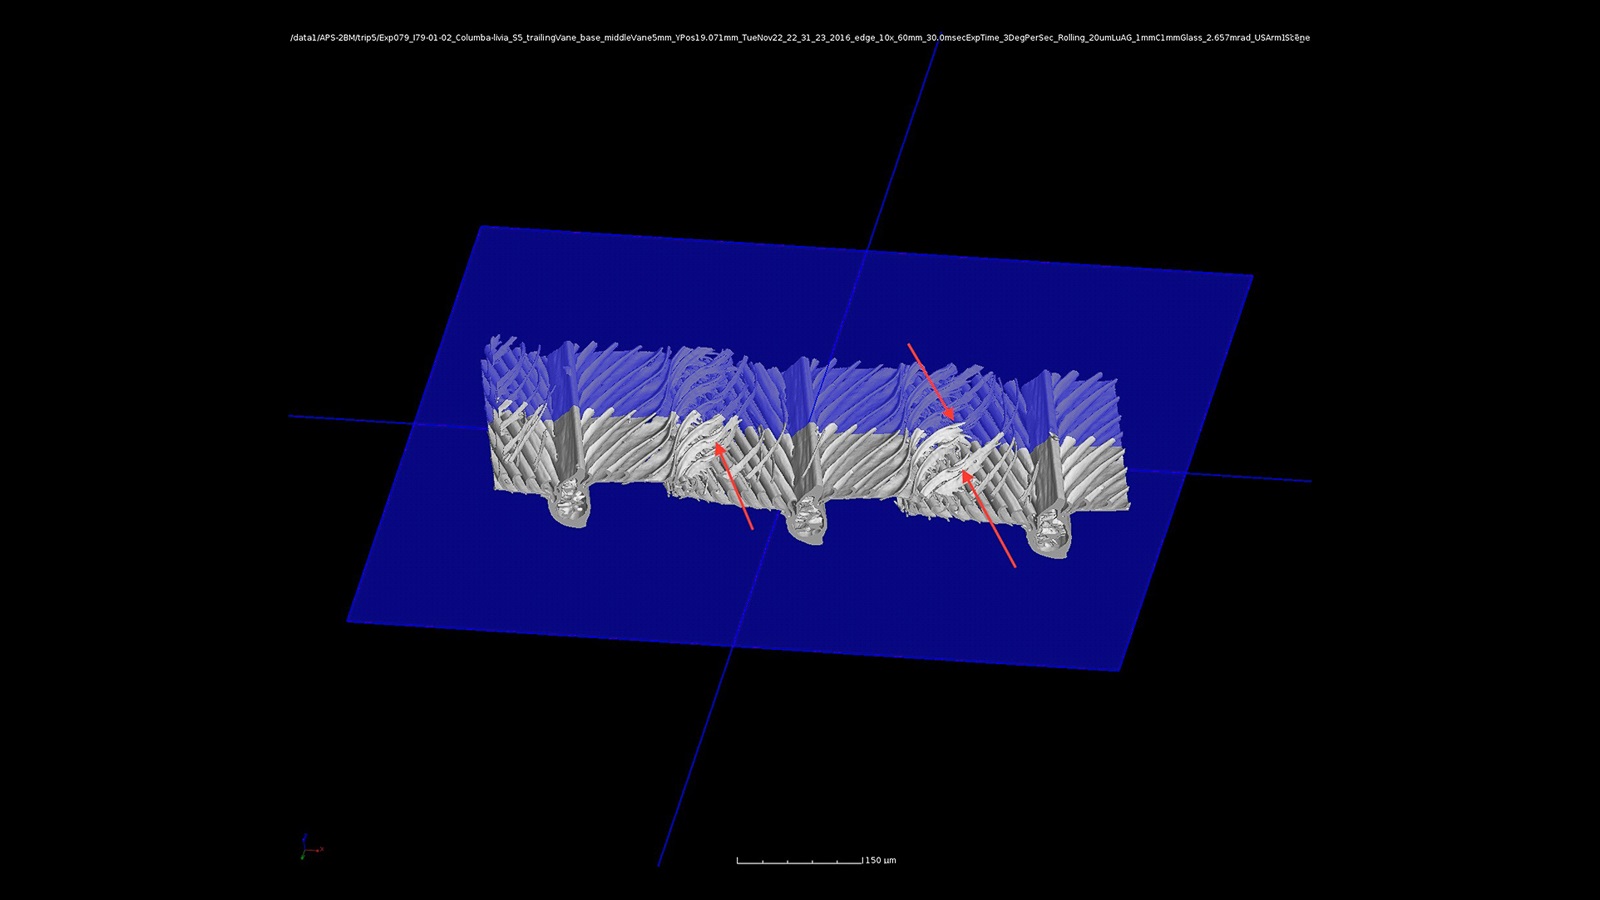 3D rendering of the same feather scan at the APS. One red arrow points down to the inter-feather hook in the cross section for reference, while other arrows point up to other hooks. (Image by Teresa Feo / Smithsonian National Museum of Natural History.)